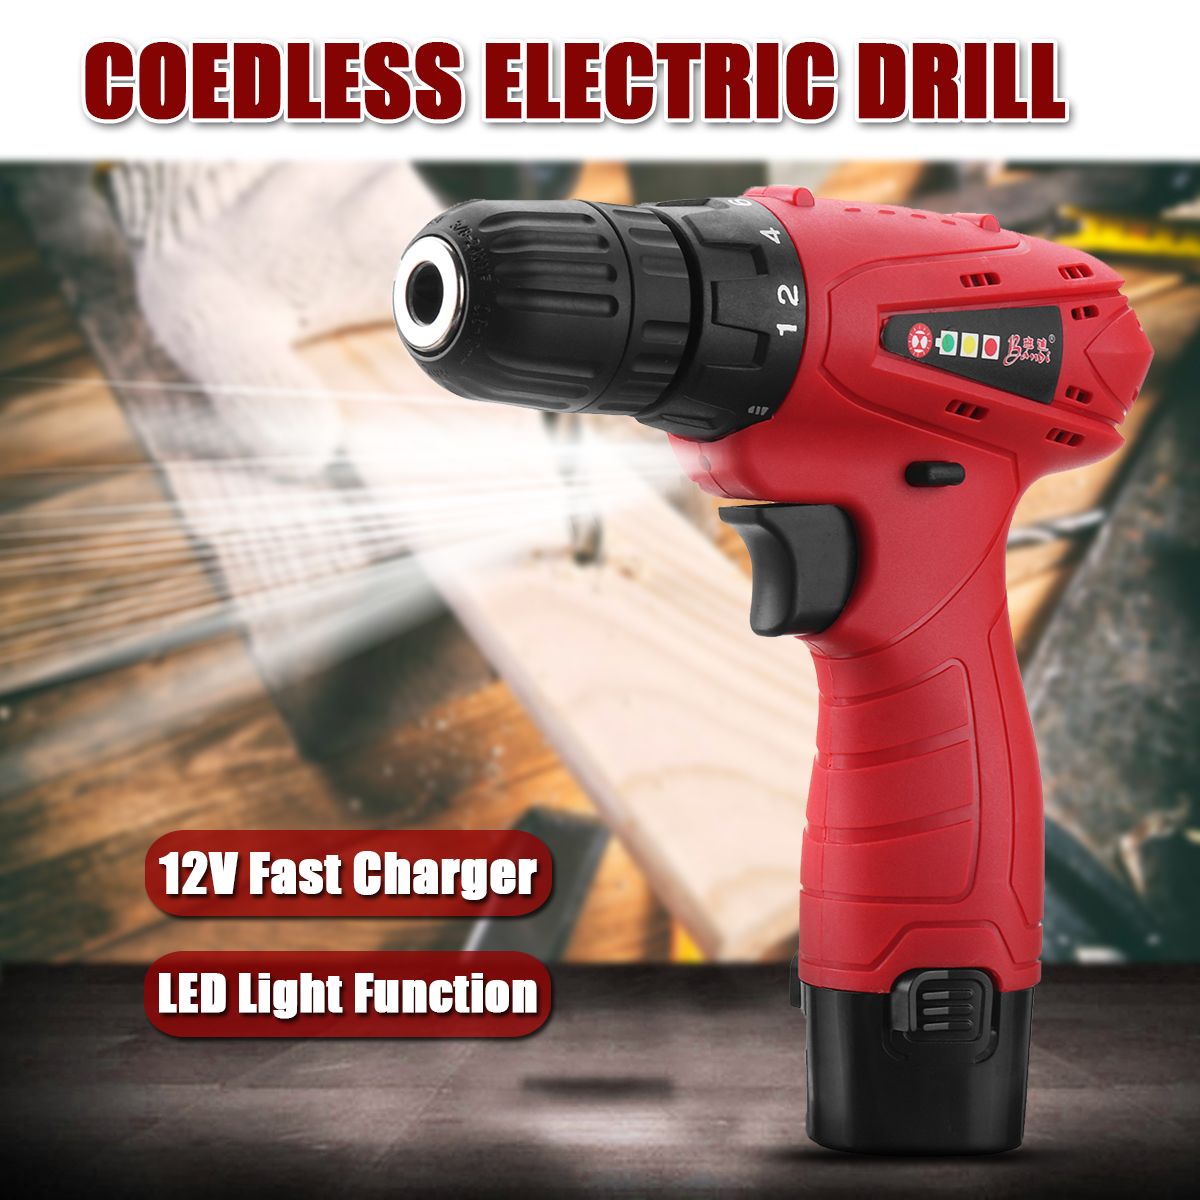 DC12V-Cordless-Electric-Screwdriver-Power-Screw-Driver-Drill-Tools-1-Battery-1-Charger-EU-Plug-1300205